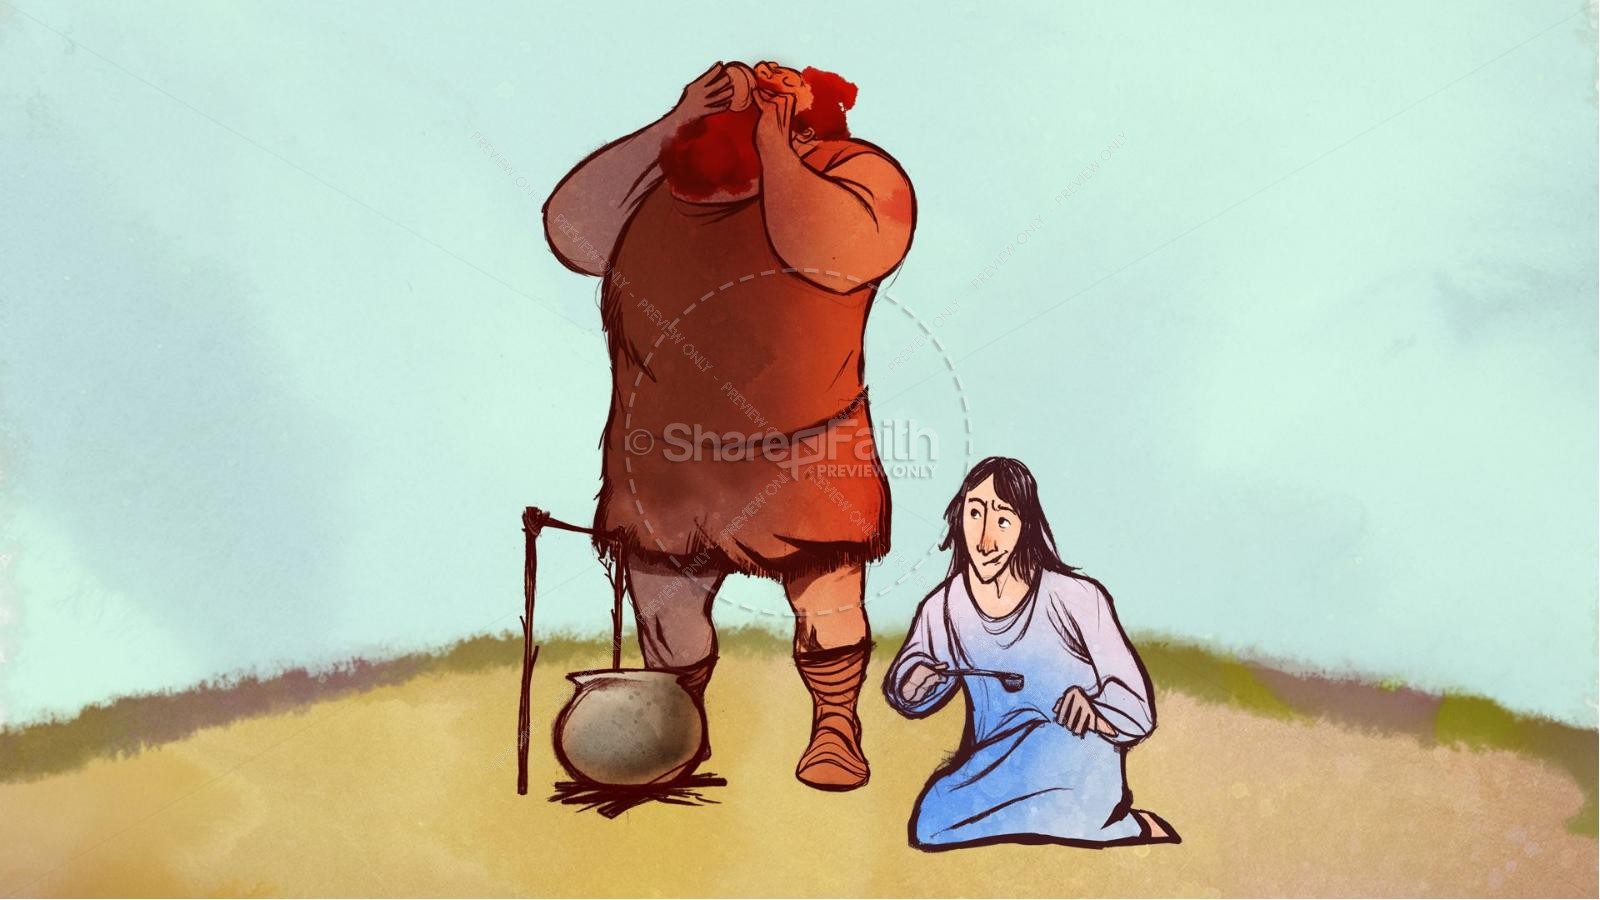 Story of Jacob and Esau Kids Bible Lesson